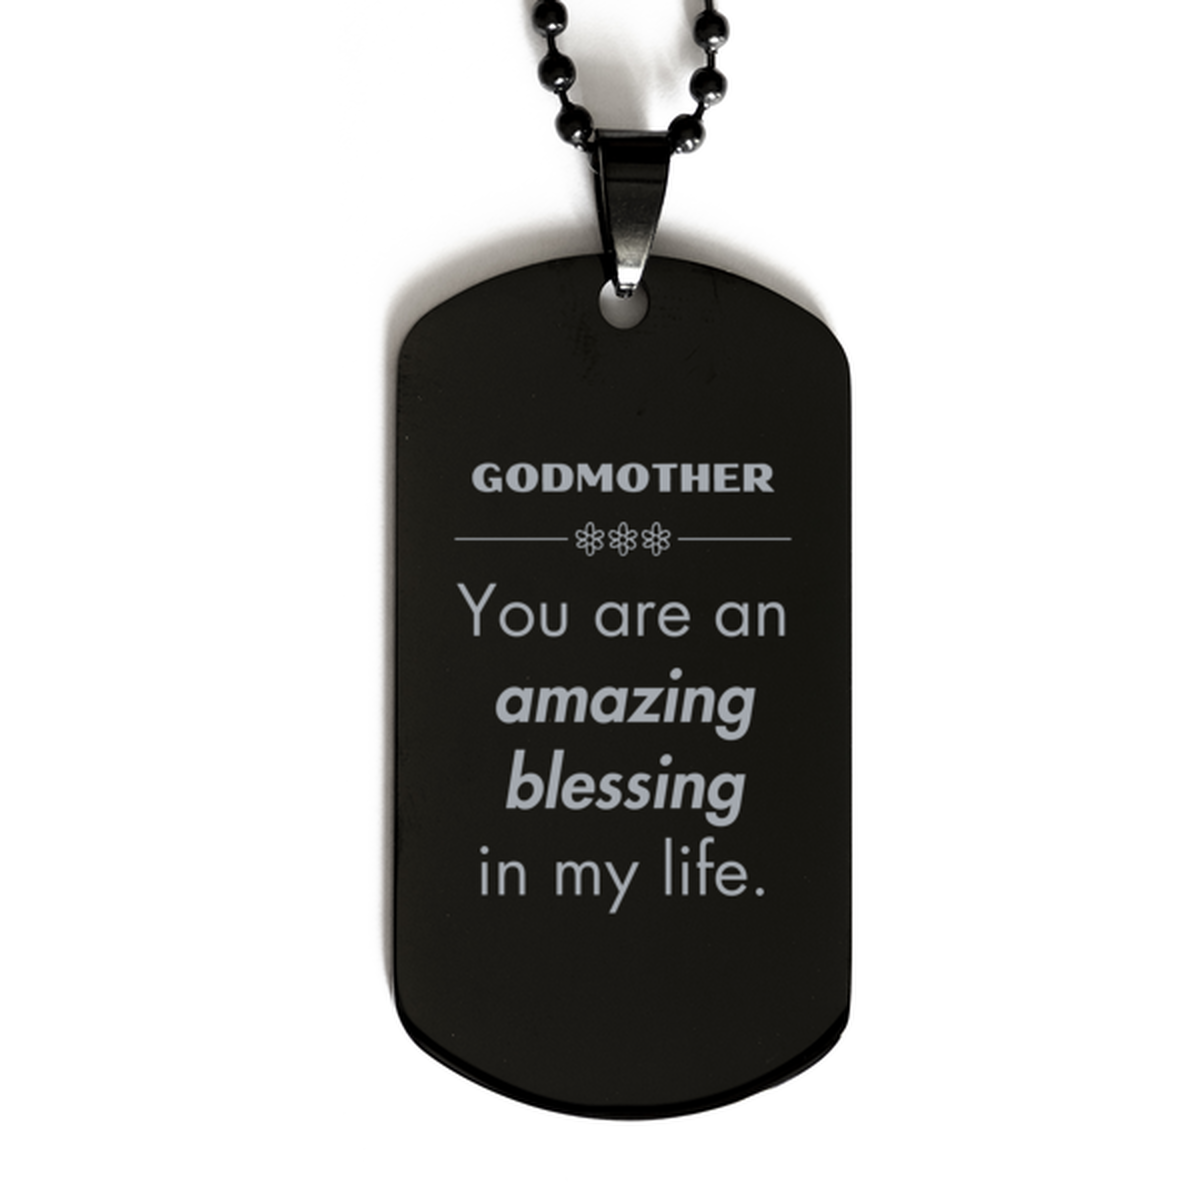 Godmother Black Dog Tag, You are an amazing blessing in my life, Thank You Gifts For Godmother, Inspirational Birthday Christmas Unique Gifts For Godmother